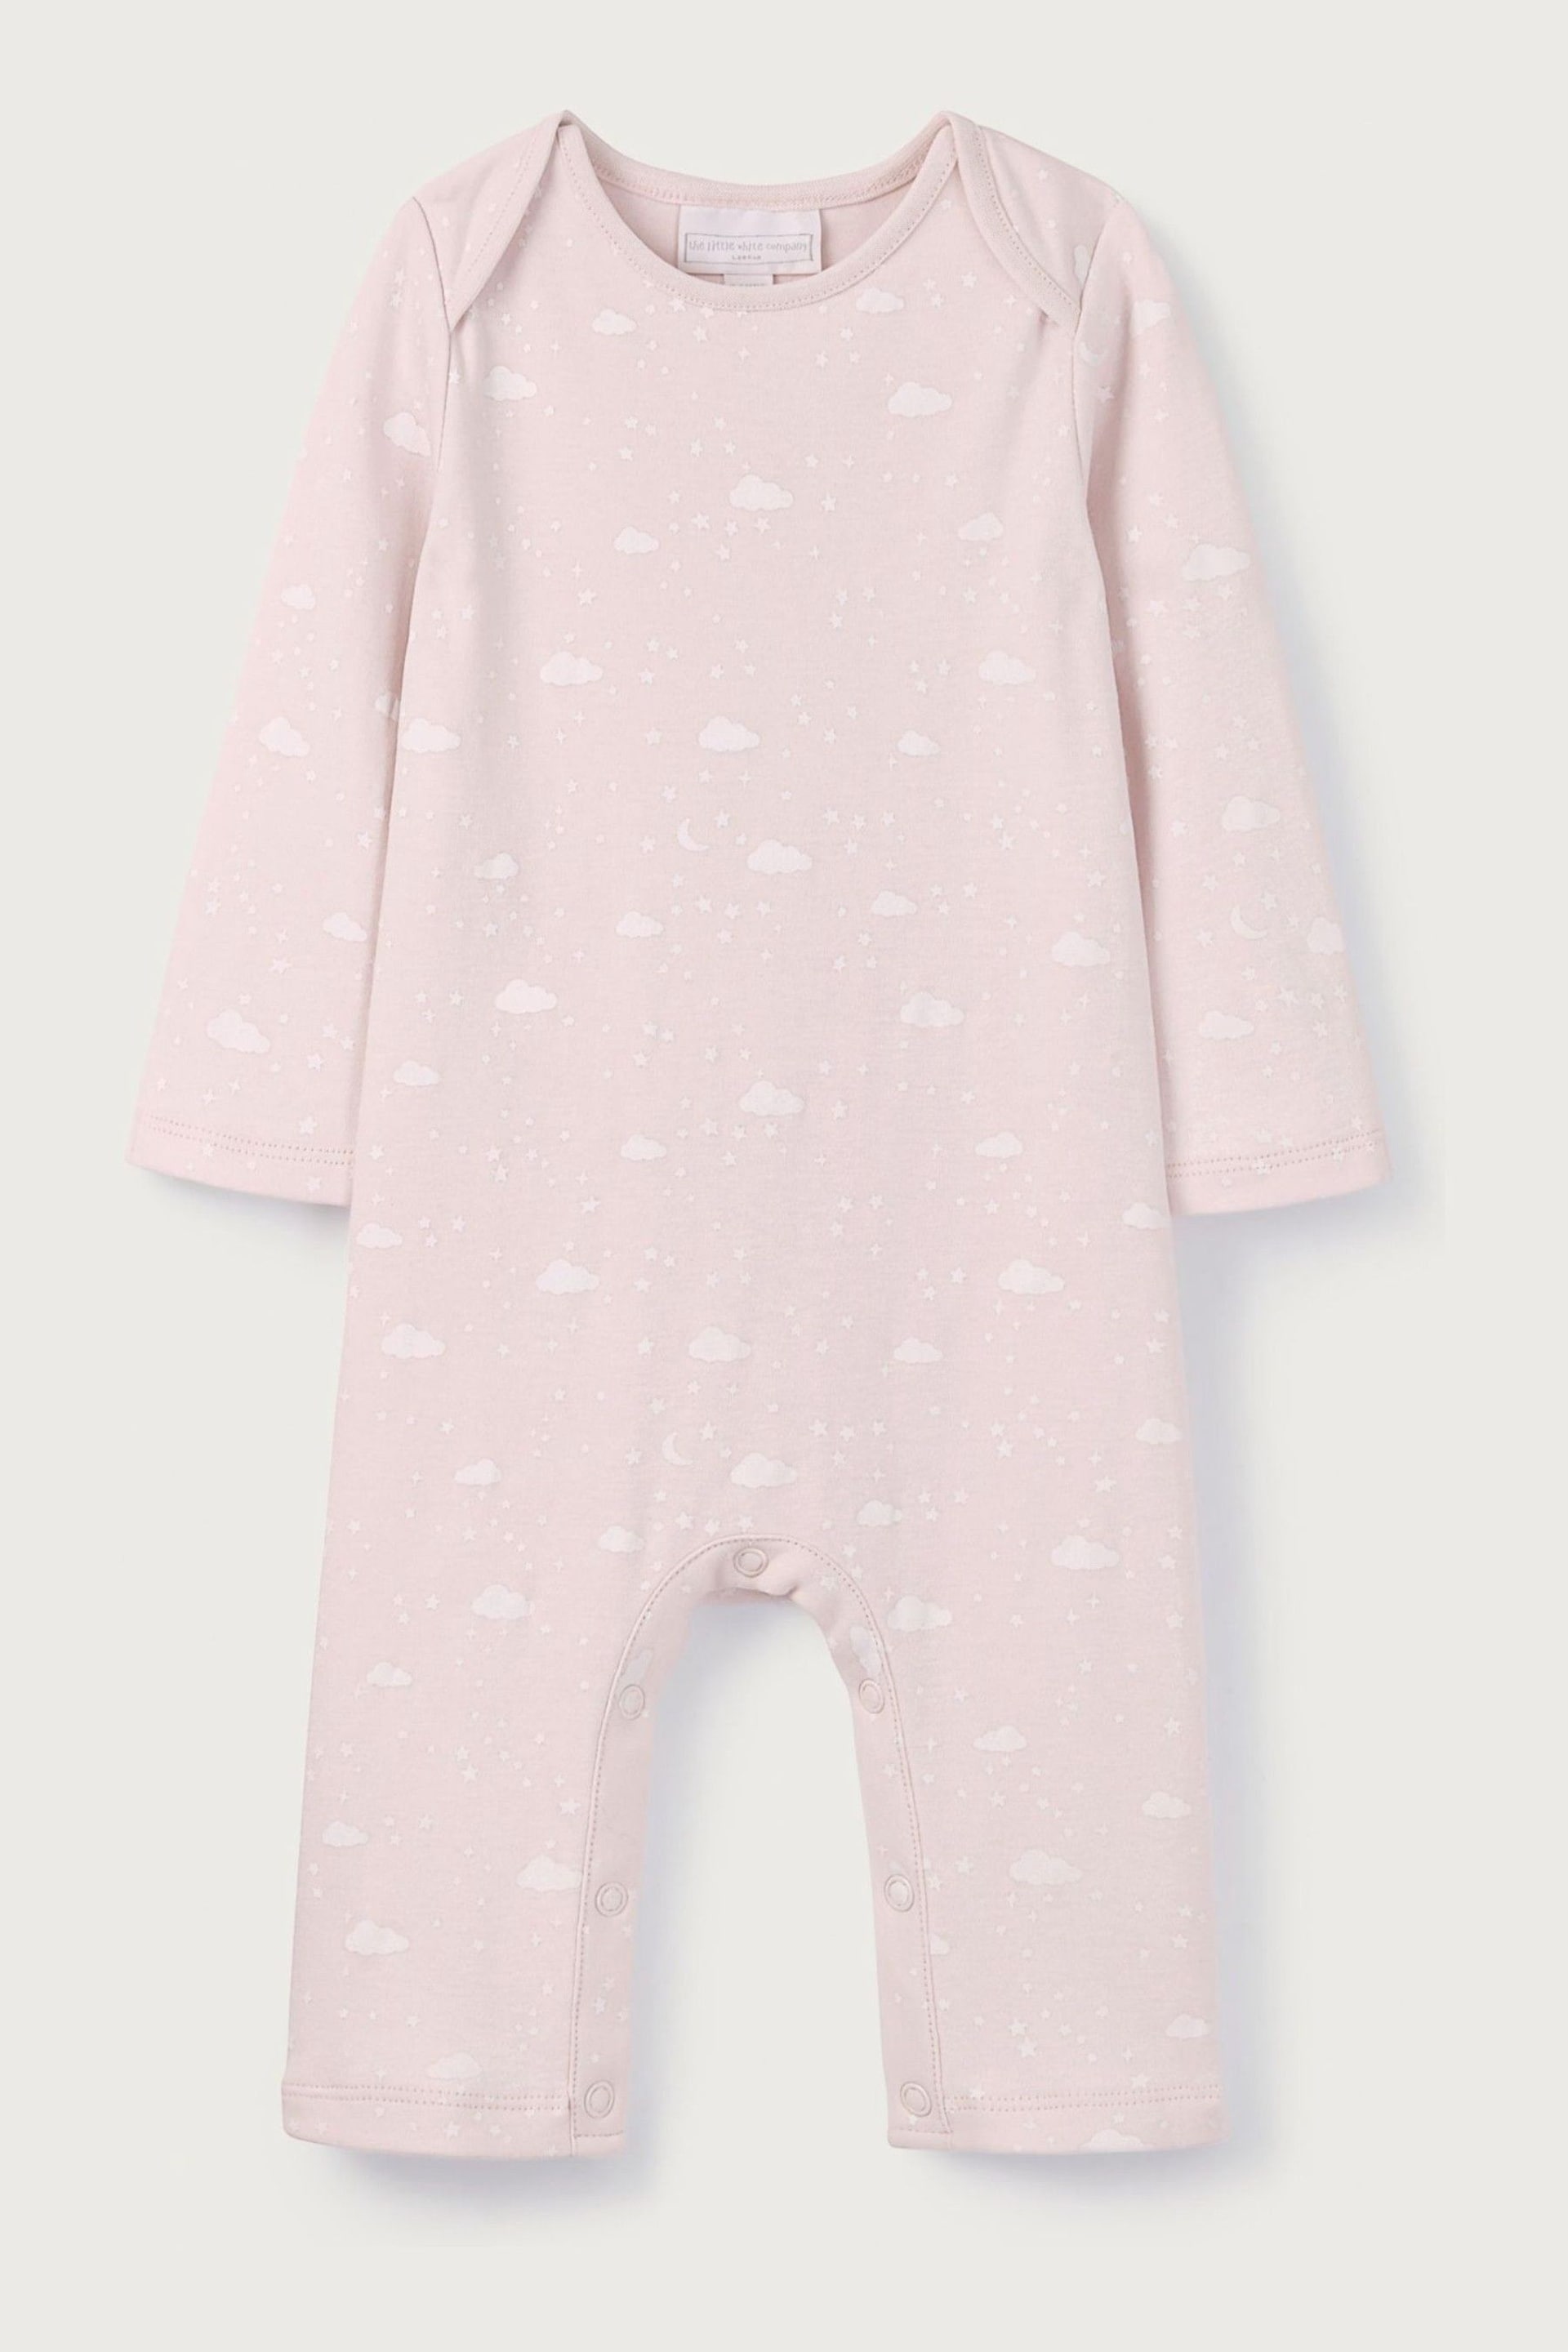 The White Company Pink Cotton Cloud Print Sleepsuit - Image 4 of 5